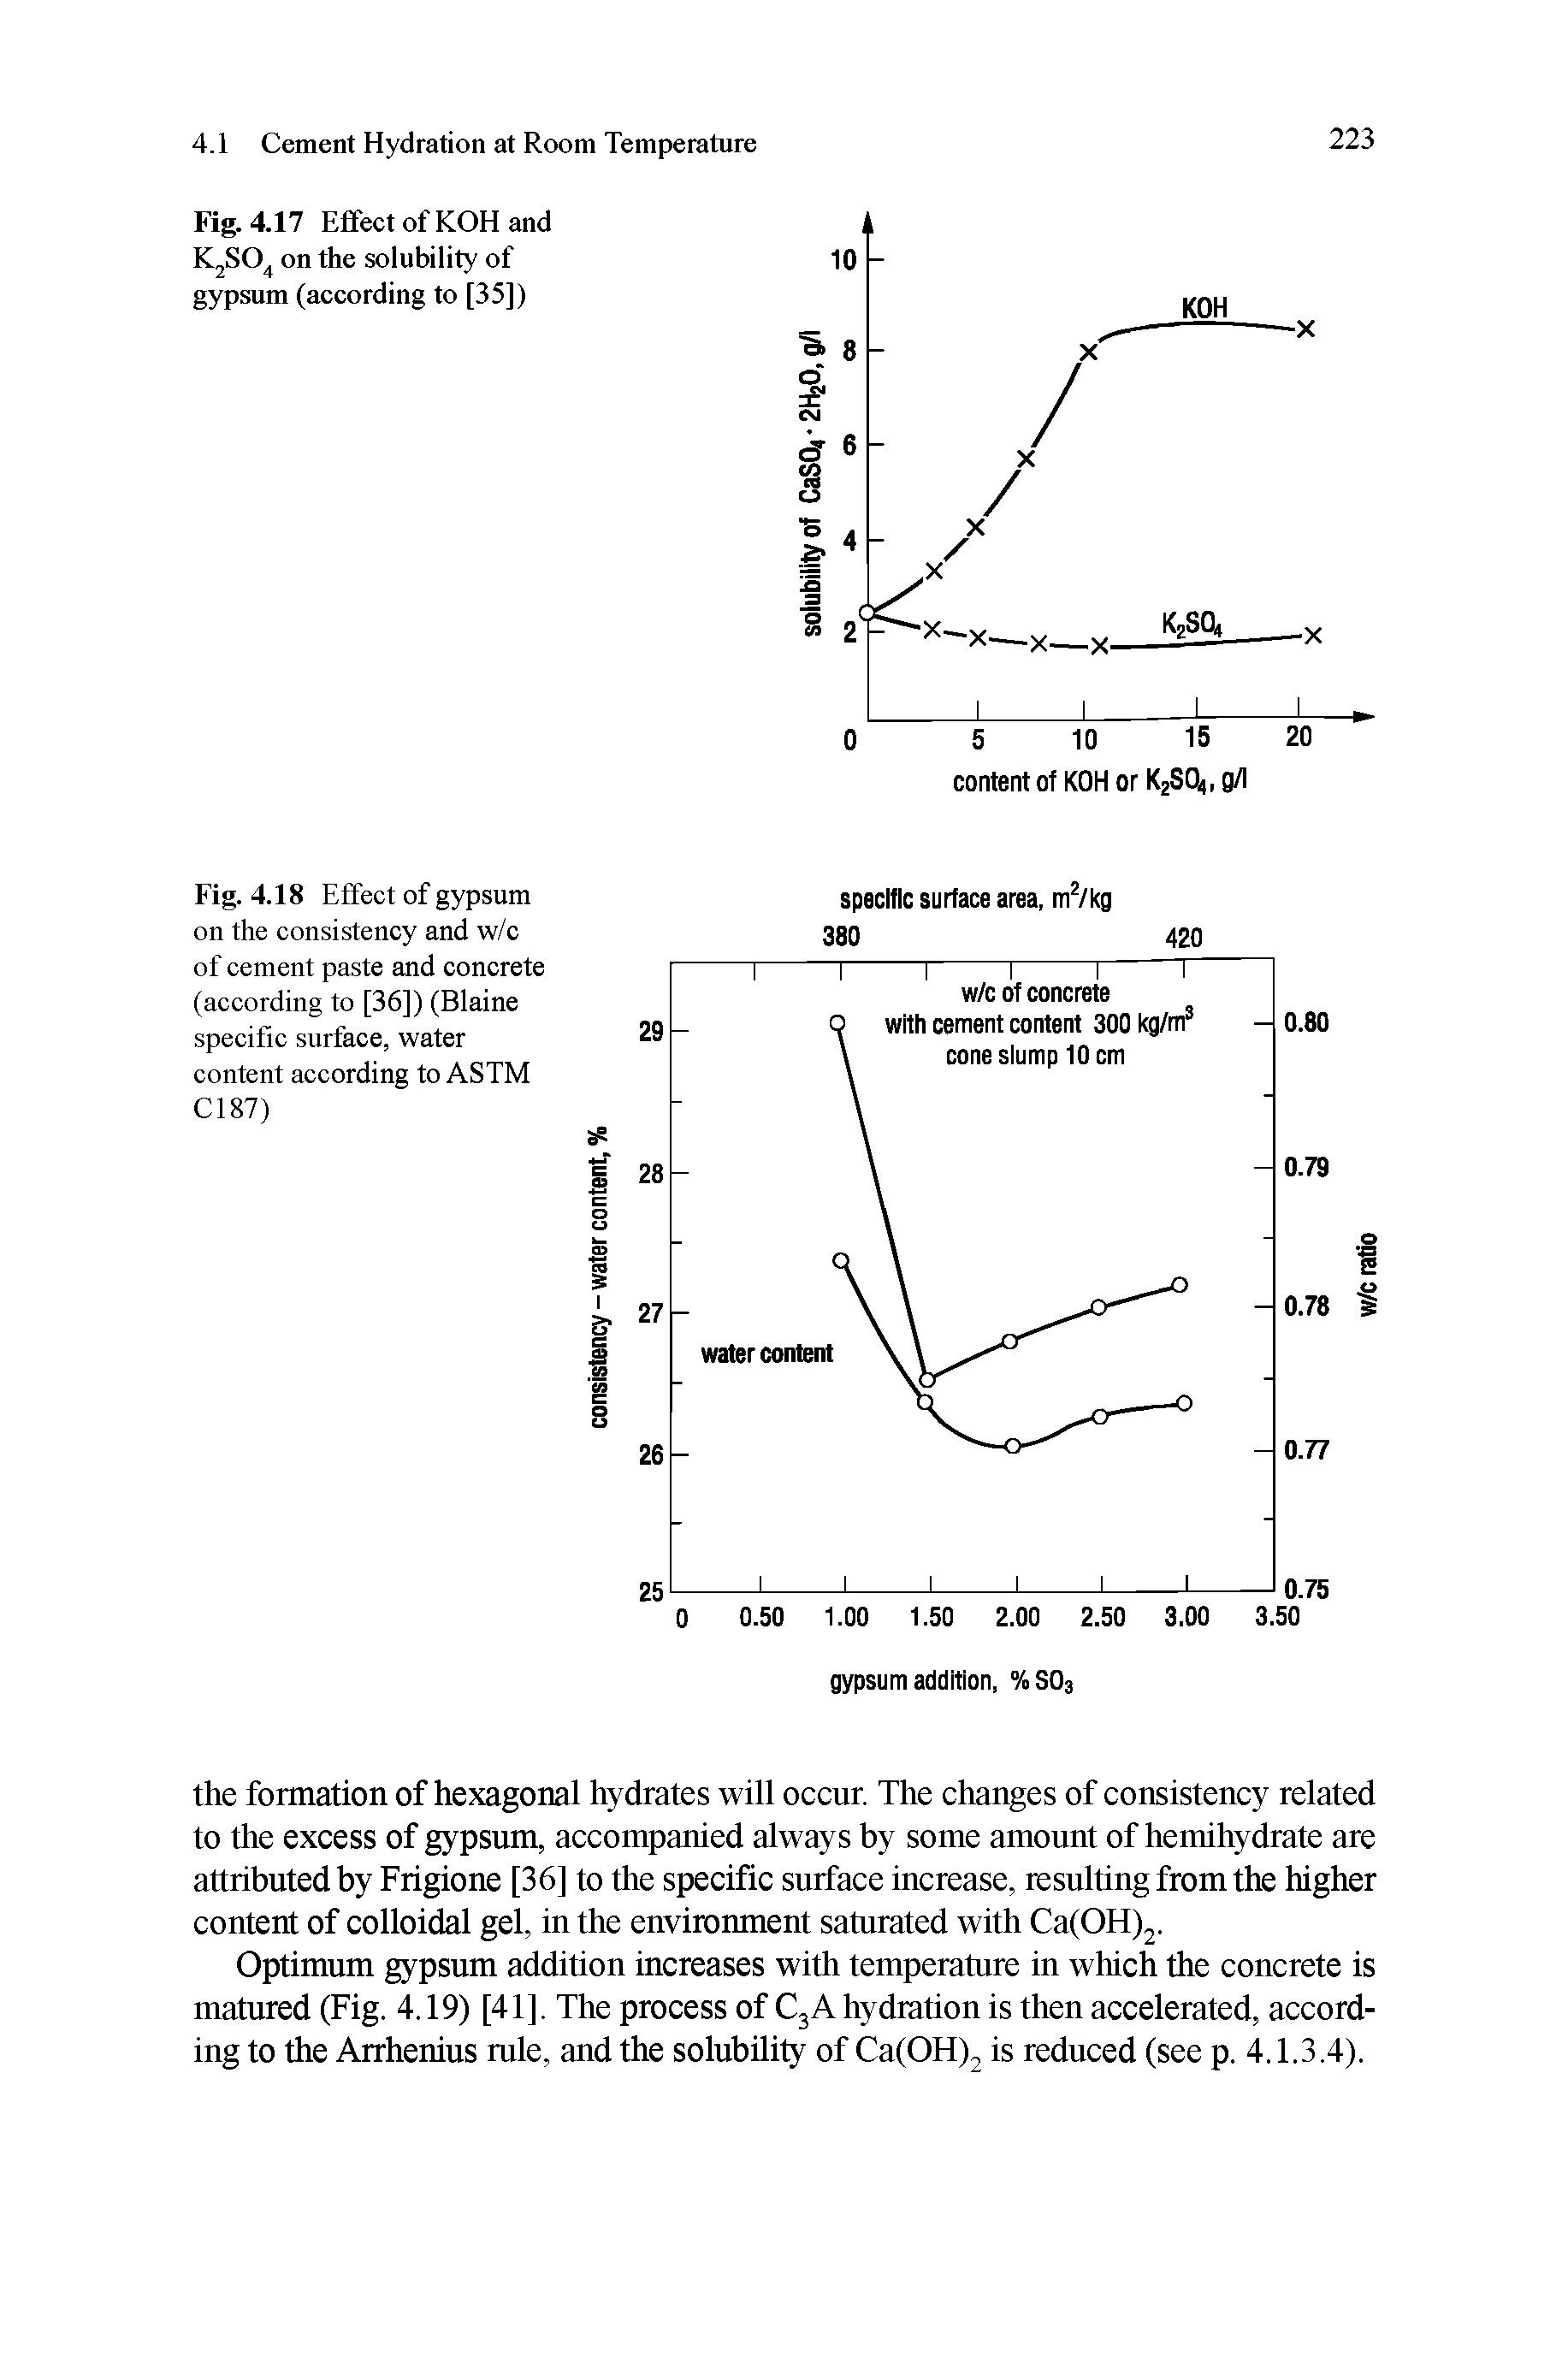 Fig. 4.18 Effect of gypsum on the consistency and w/c of cement paste and concrete (according to [36]) (Blaine specific surface, water content according to ASTM Cl 87)...